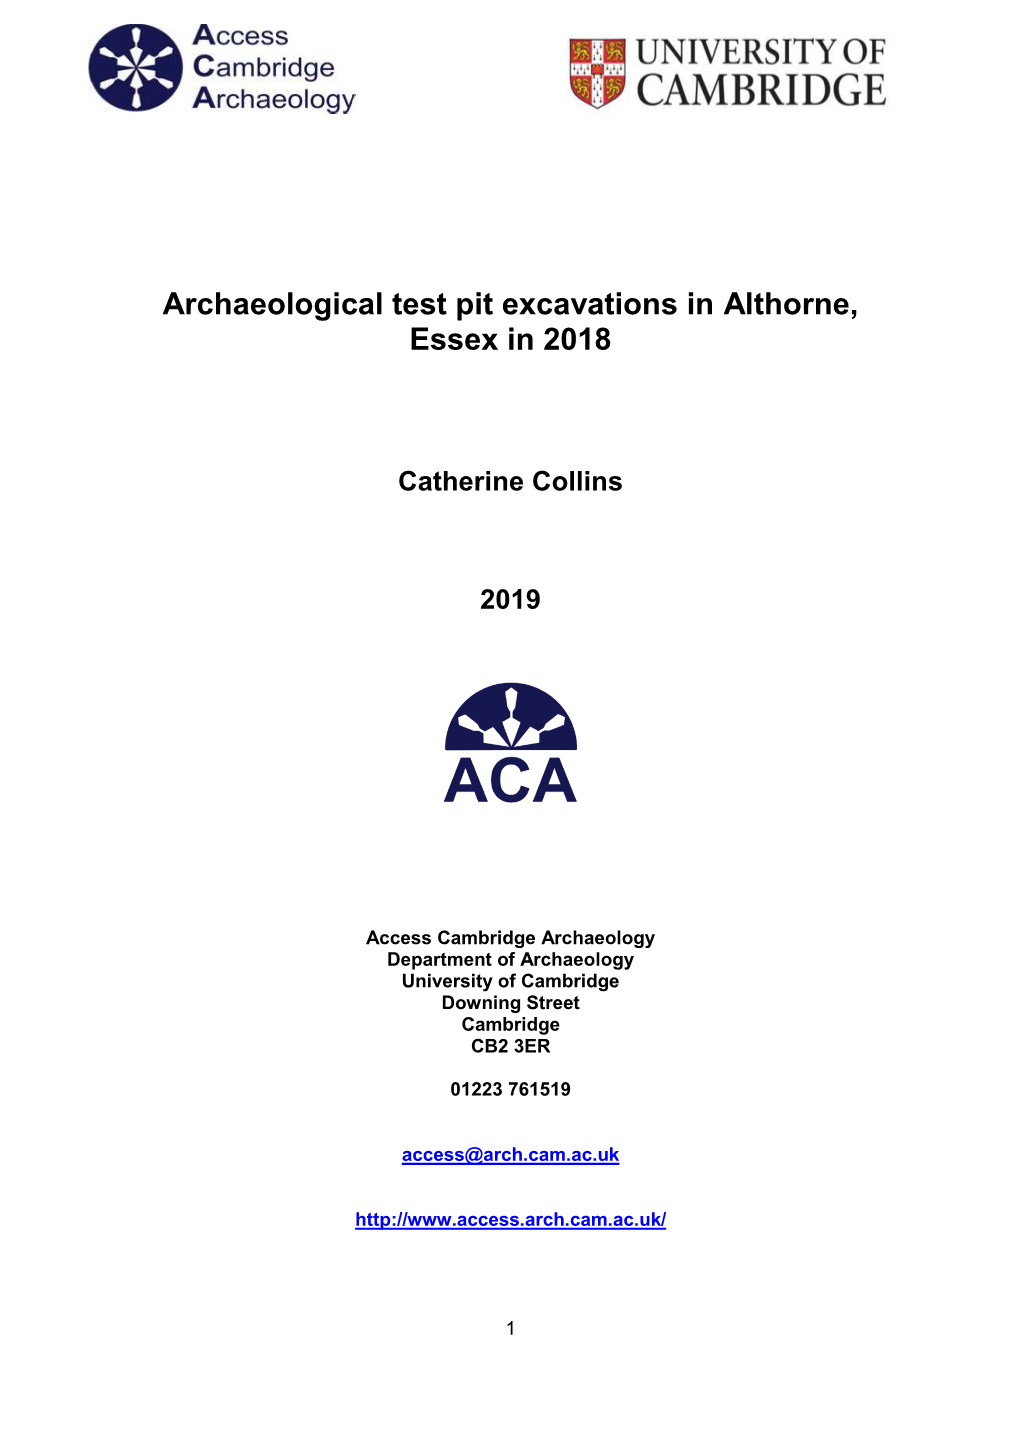 Archaeological Test Pit Excavations in Althorne, Essex in 2018